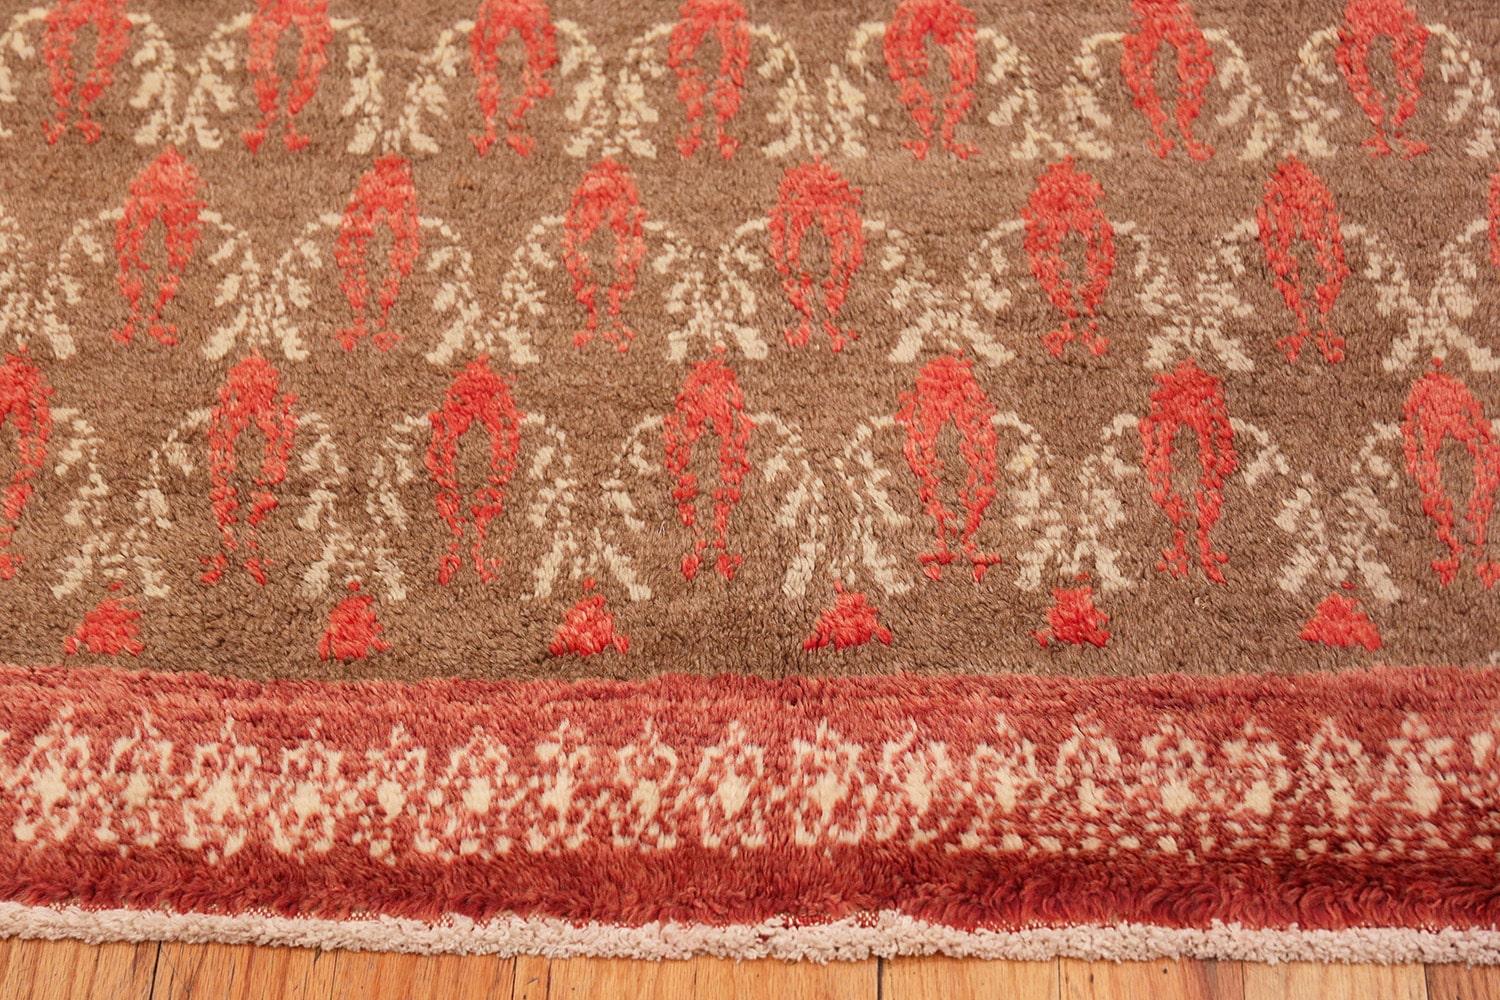 Turkish Art Deco design vintage rug, country of Origin: Turkey, date circa 1930's - Size: 3 ft 10 in x 4 ft 3 in (1.17 m x 1.3 m). 

Similar to many other types of art deco rugs, this Turkish carpet features decorative patterns and rich, crisp